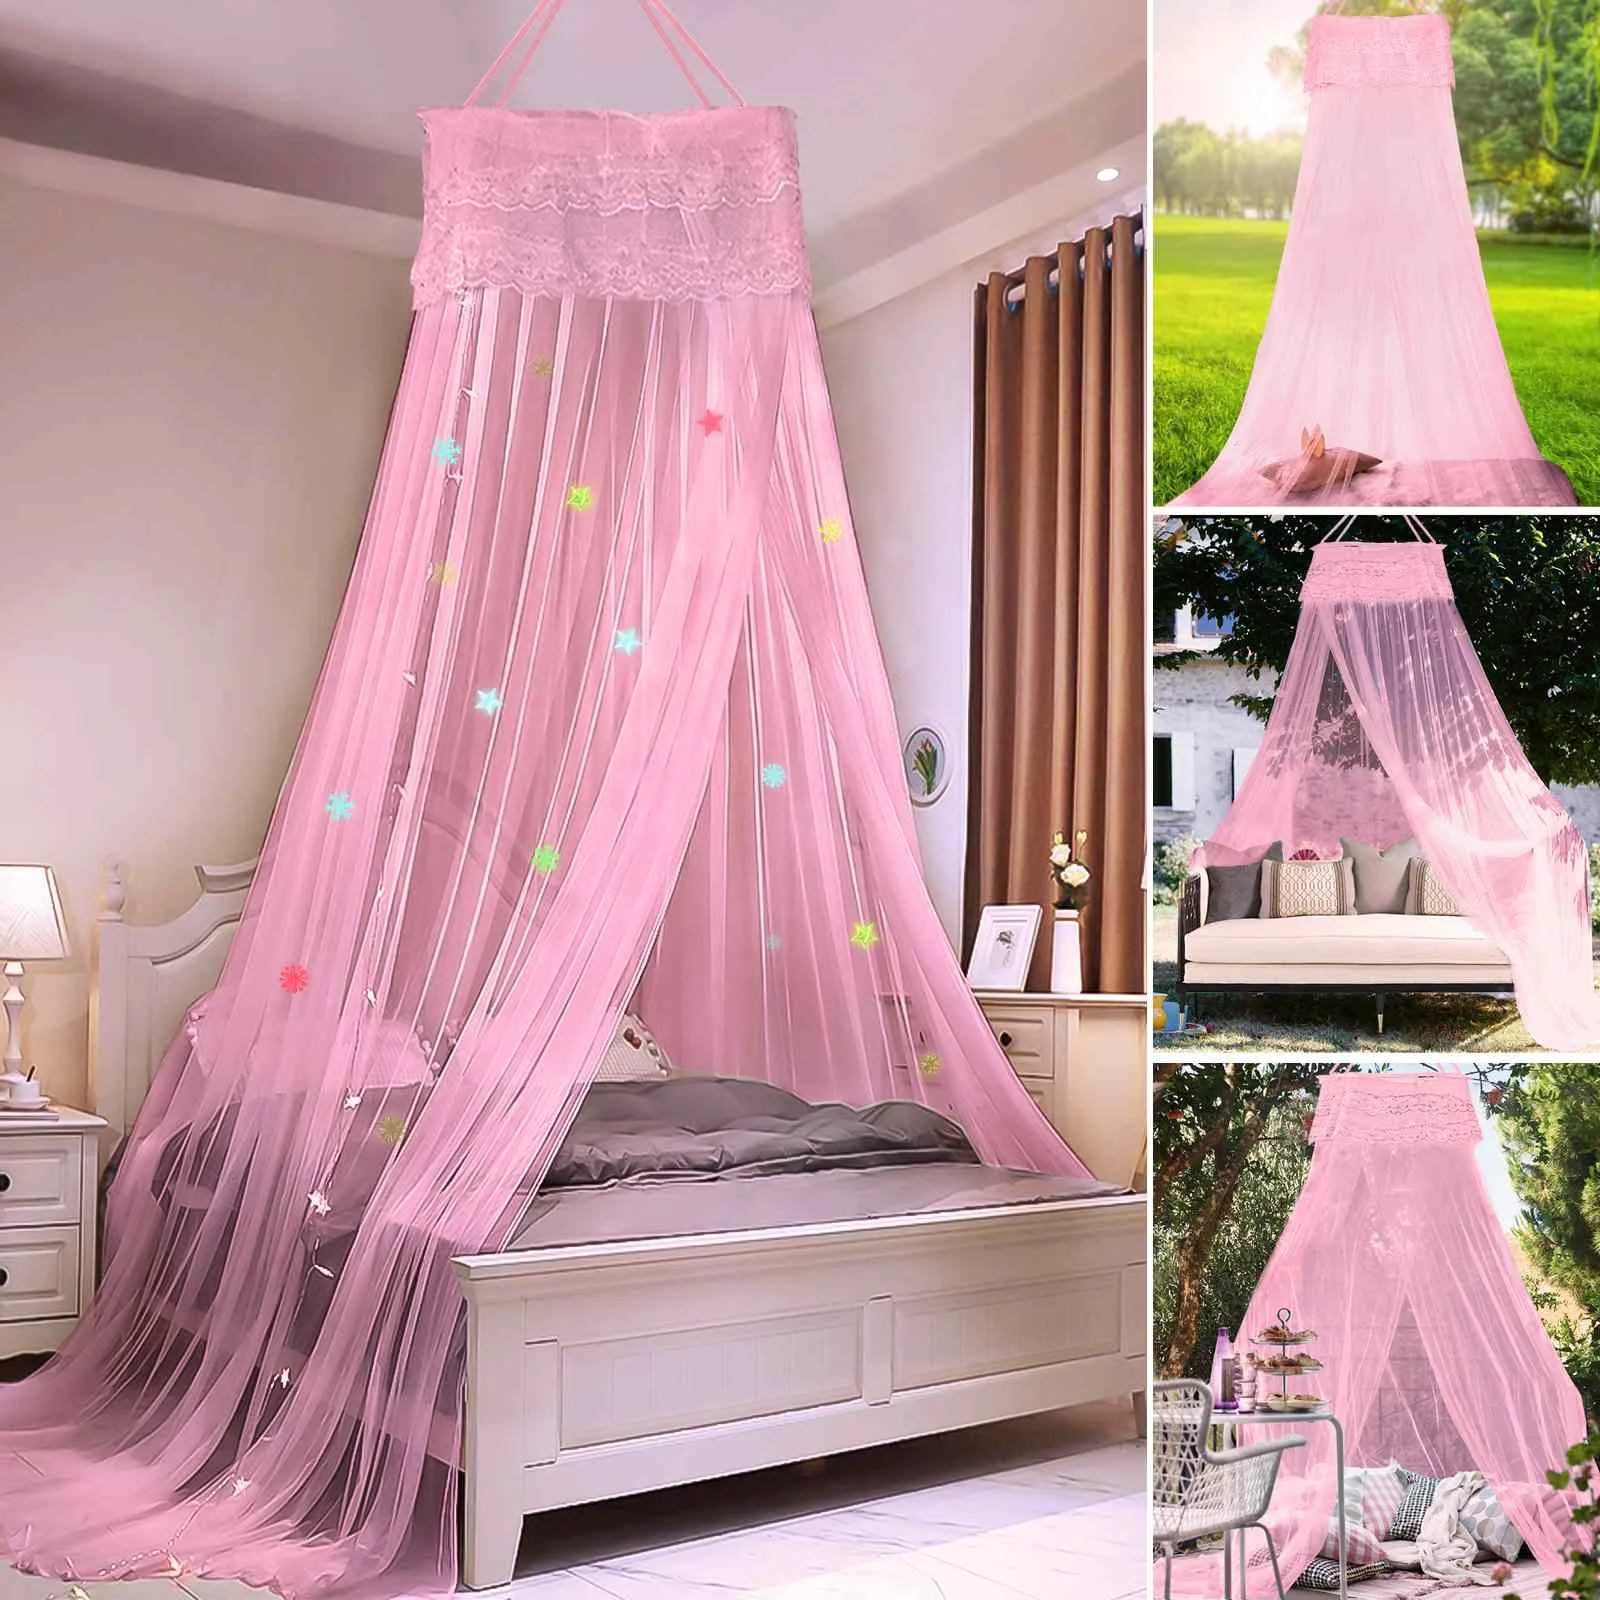 Lace Bed Mosquito Netting Princess Style Round Dome Net Elegant Bedroom Decor 